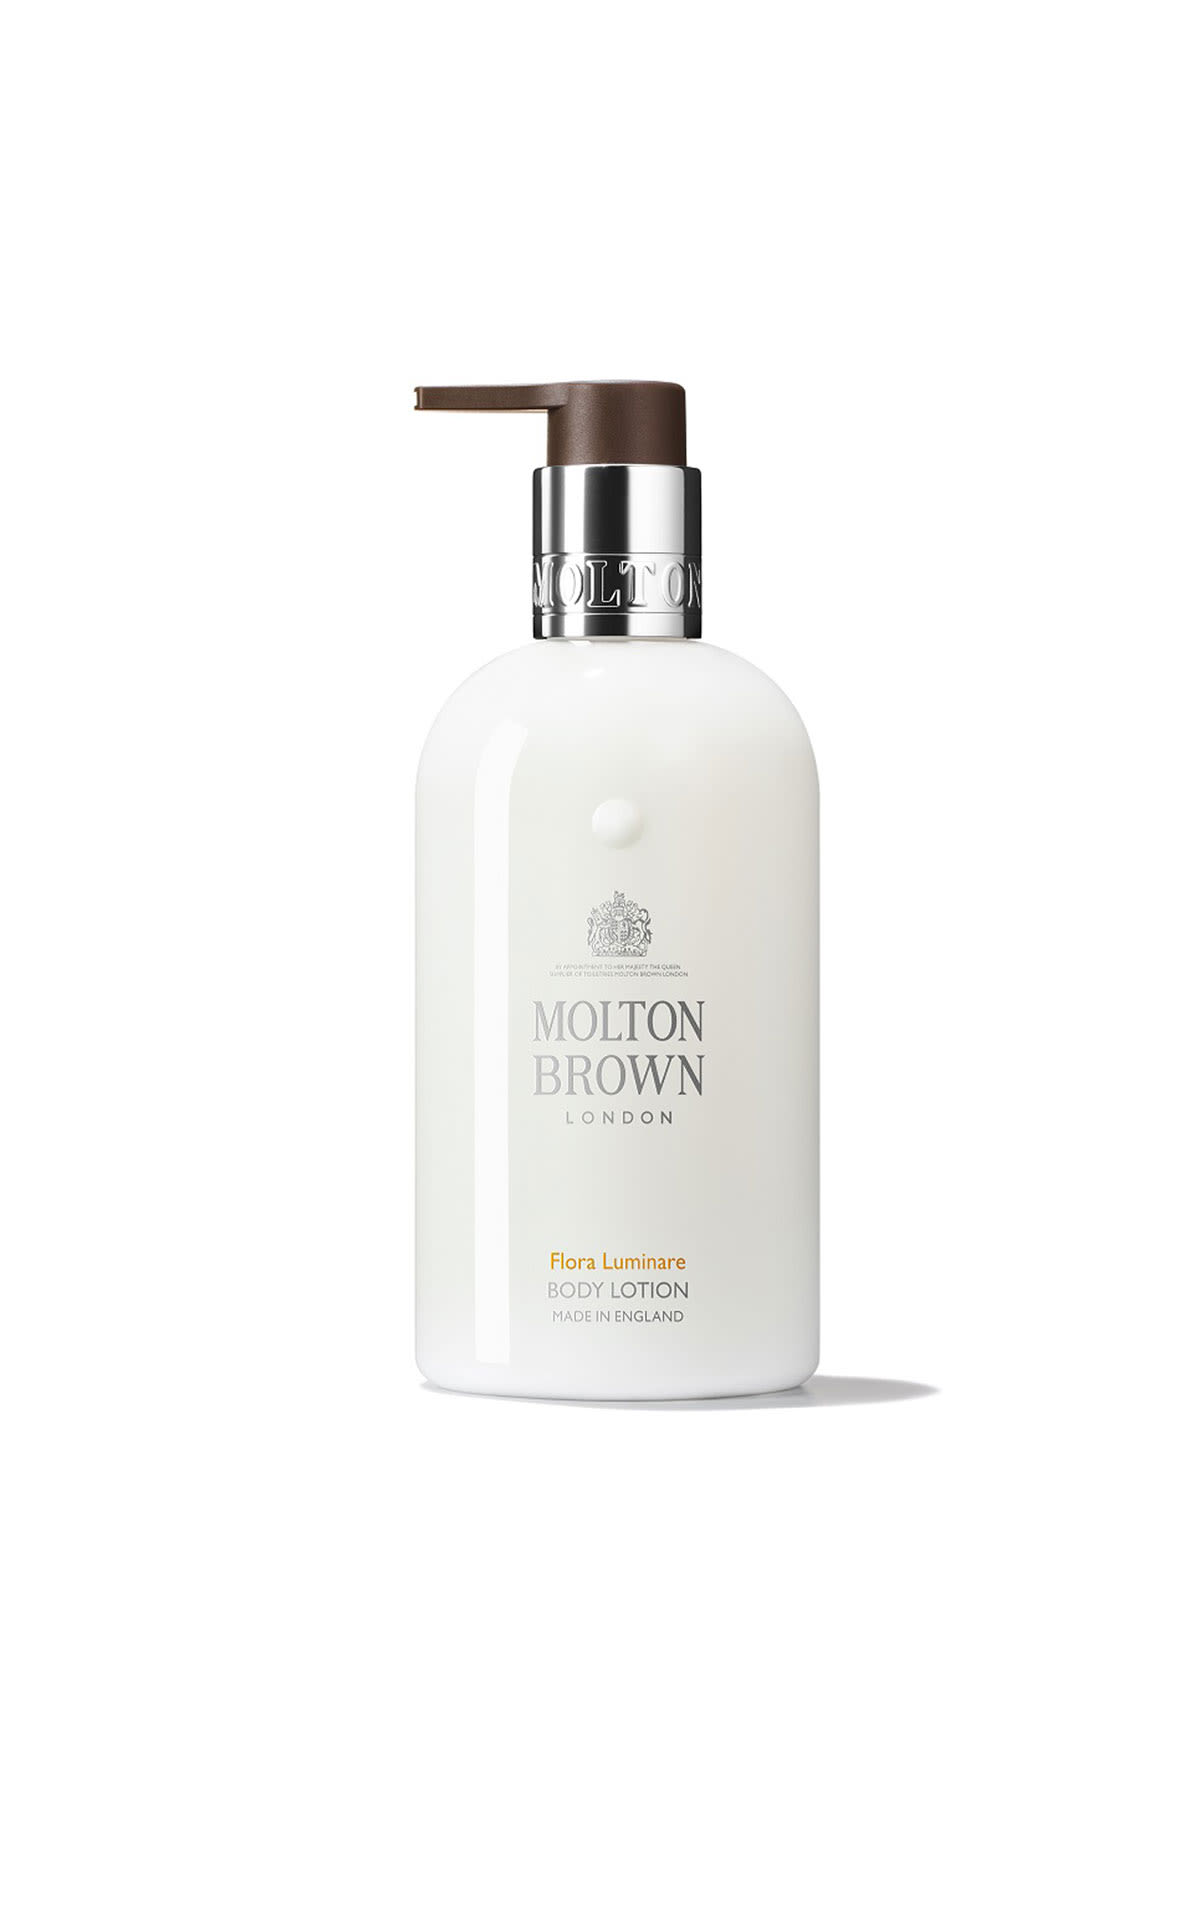 Molton Brown 300ml body lotion floral luminare from Bicester Village